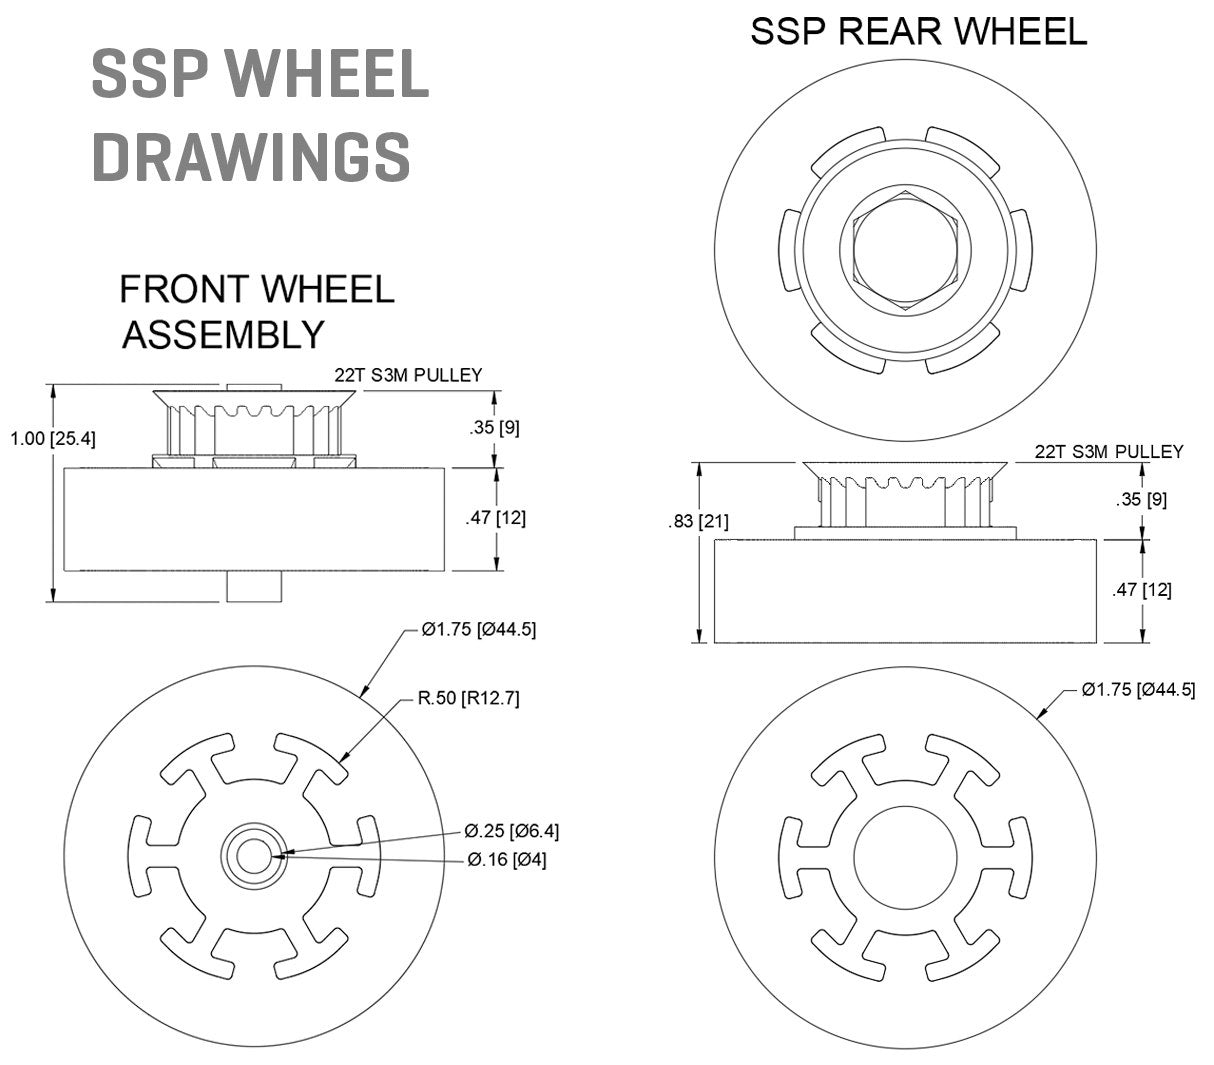 SSP Wheels: 1.75 x 0.5 inch with Integrated Pulleys